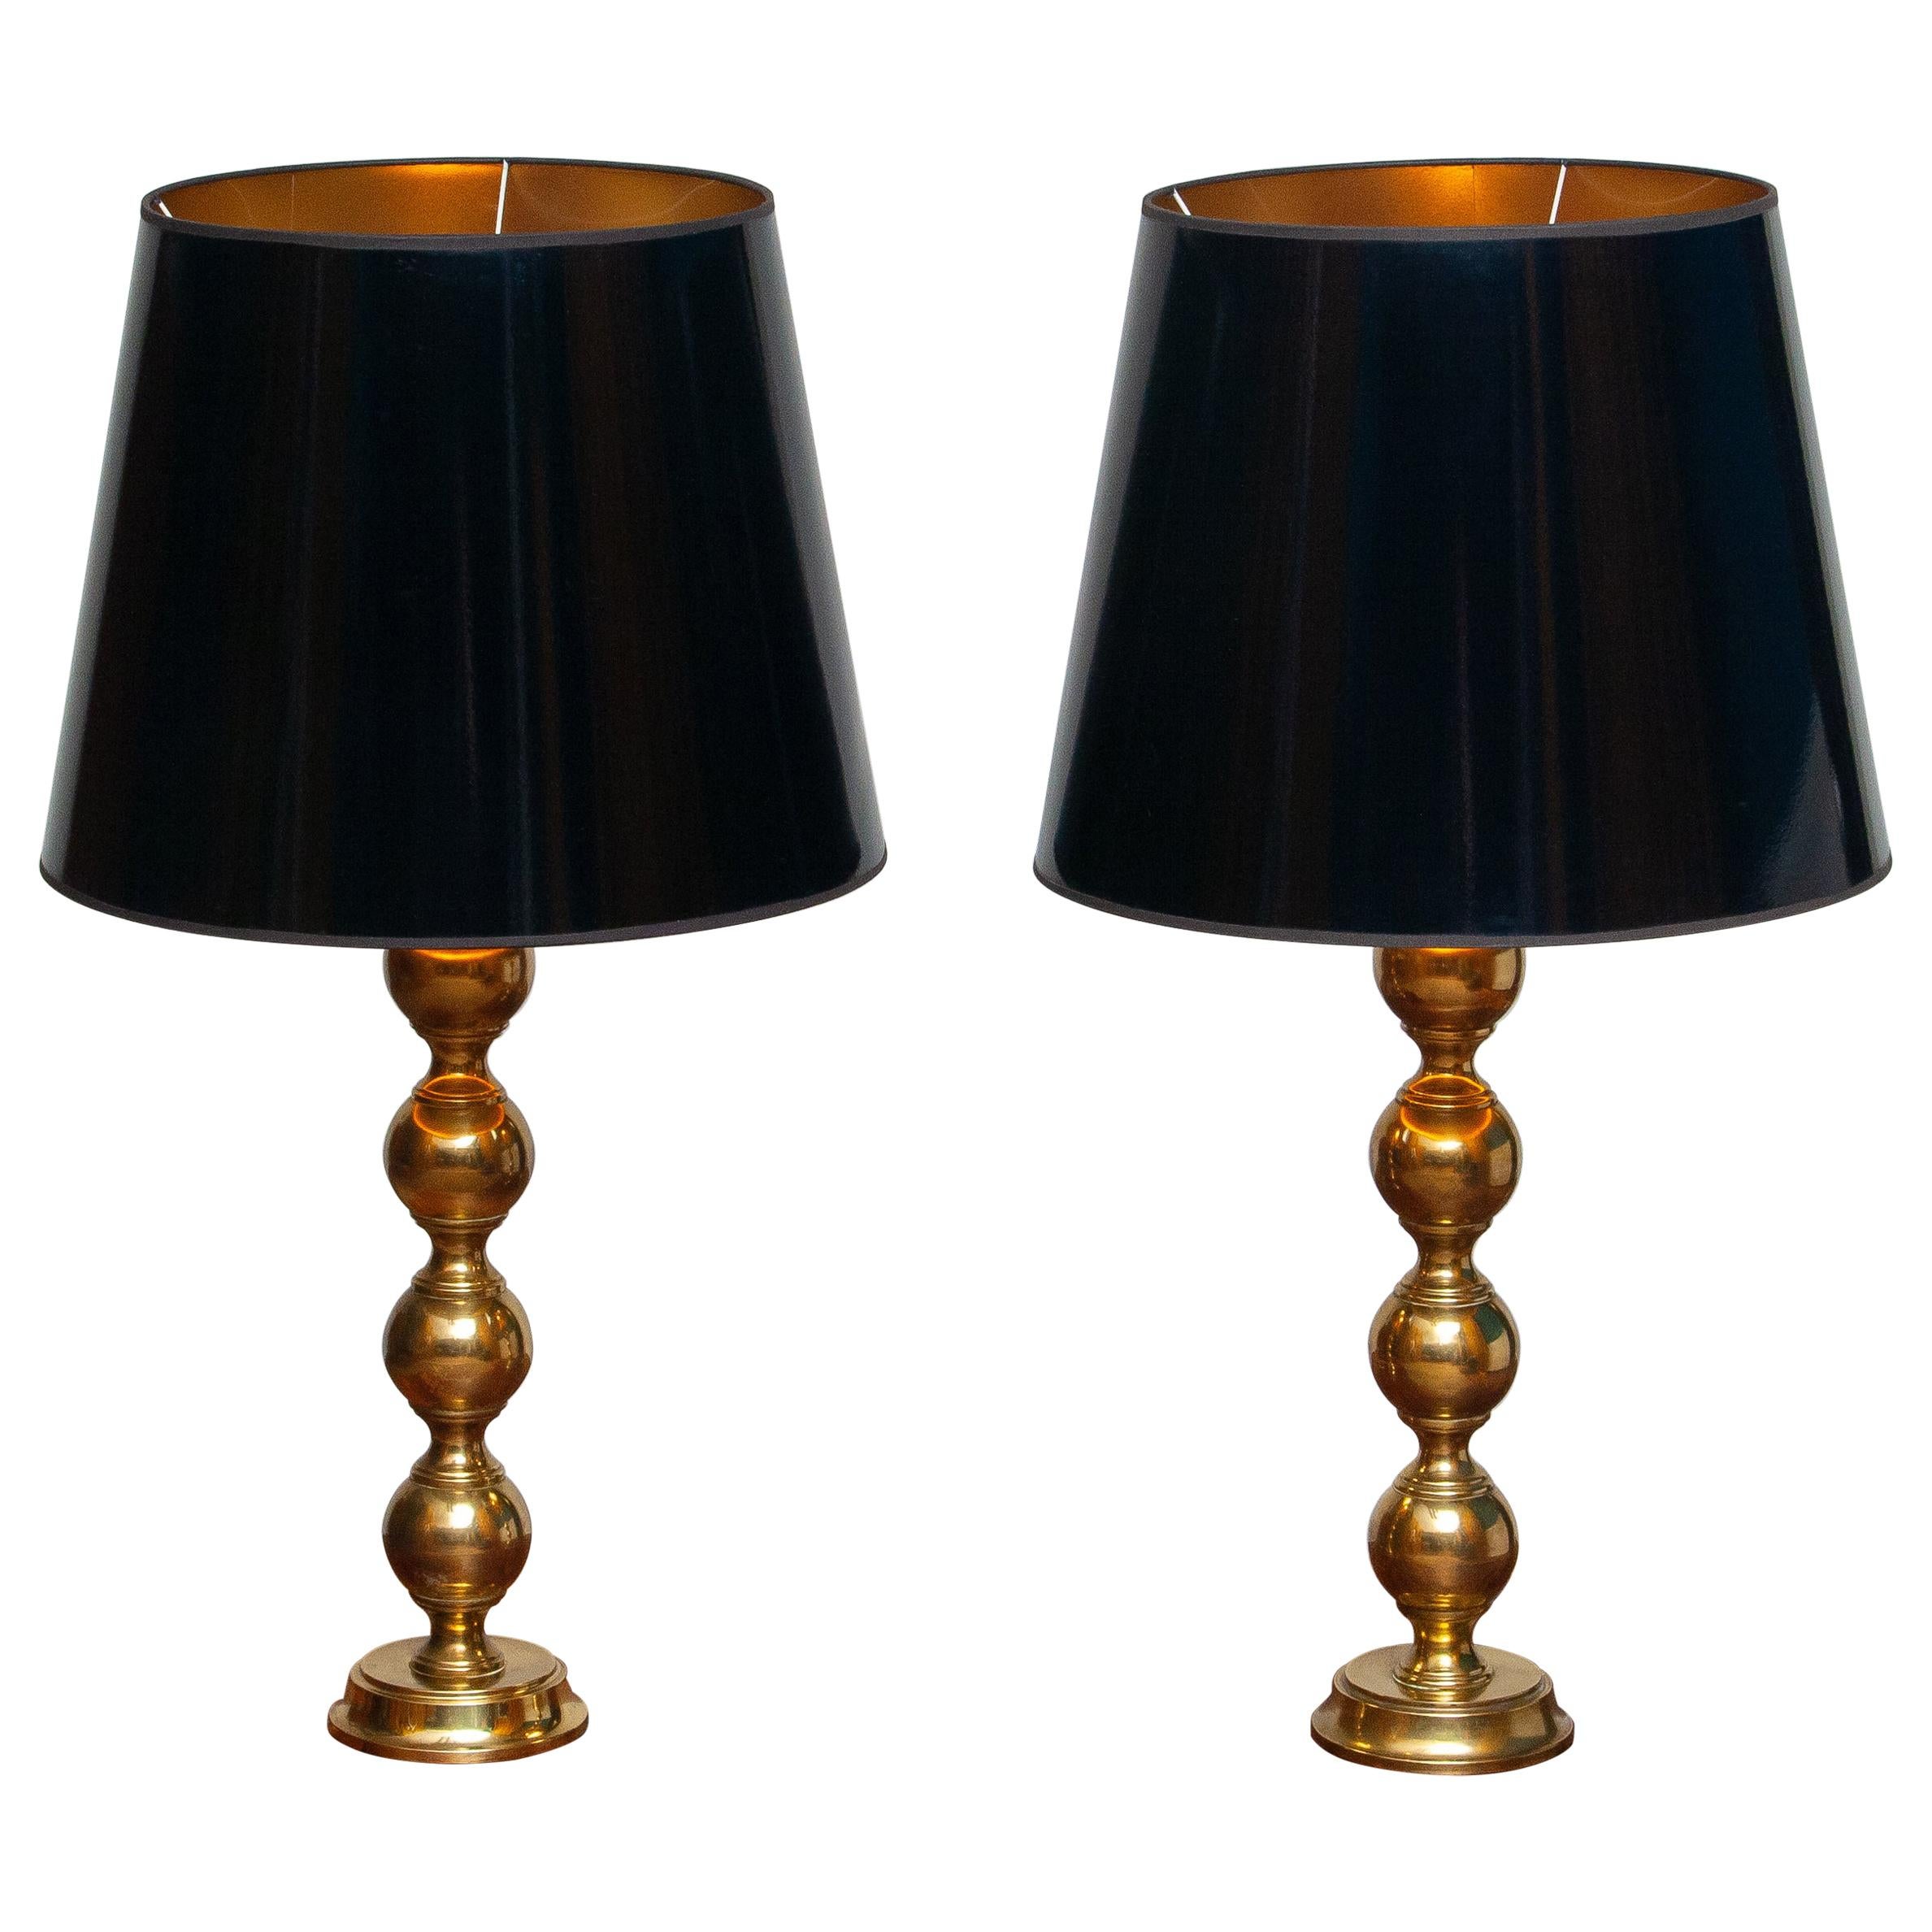 These beautiful extra large brass 1950s spherical table lamps are extremely rare and in great condition.
Suits 110 / 230 volts and have both one E27 / 28 bulb with switch. Technically 100%
The brass stand alone is 20 inches in height. Together